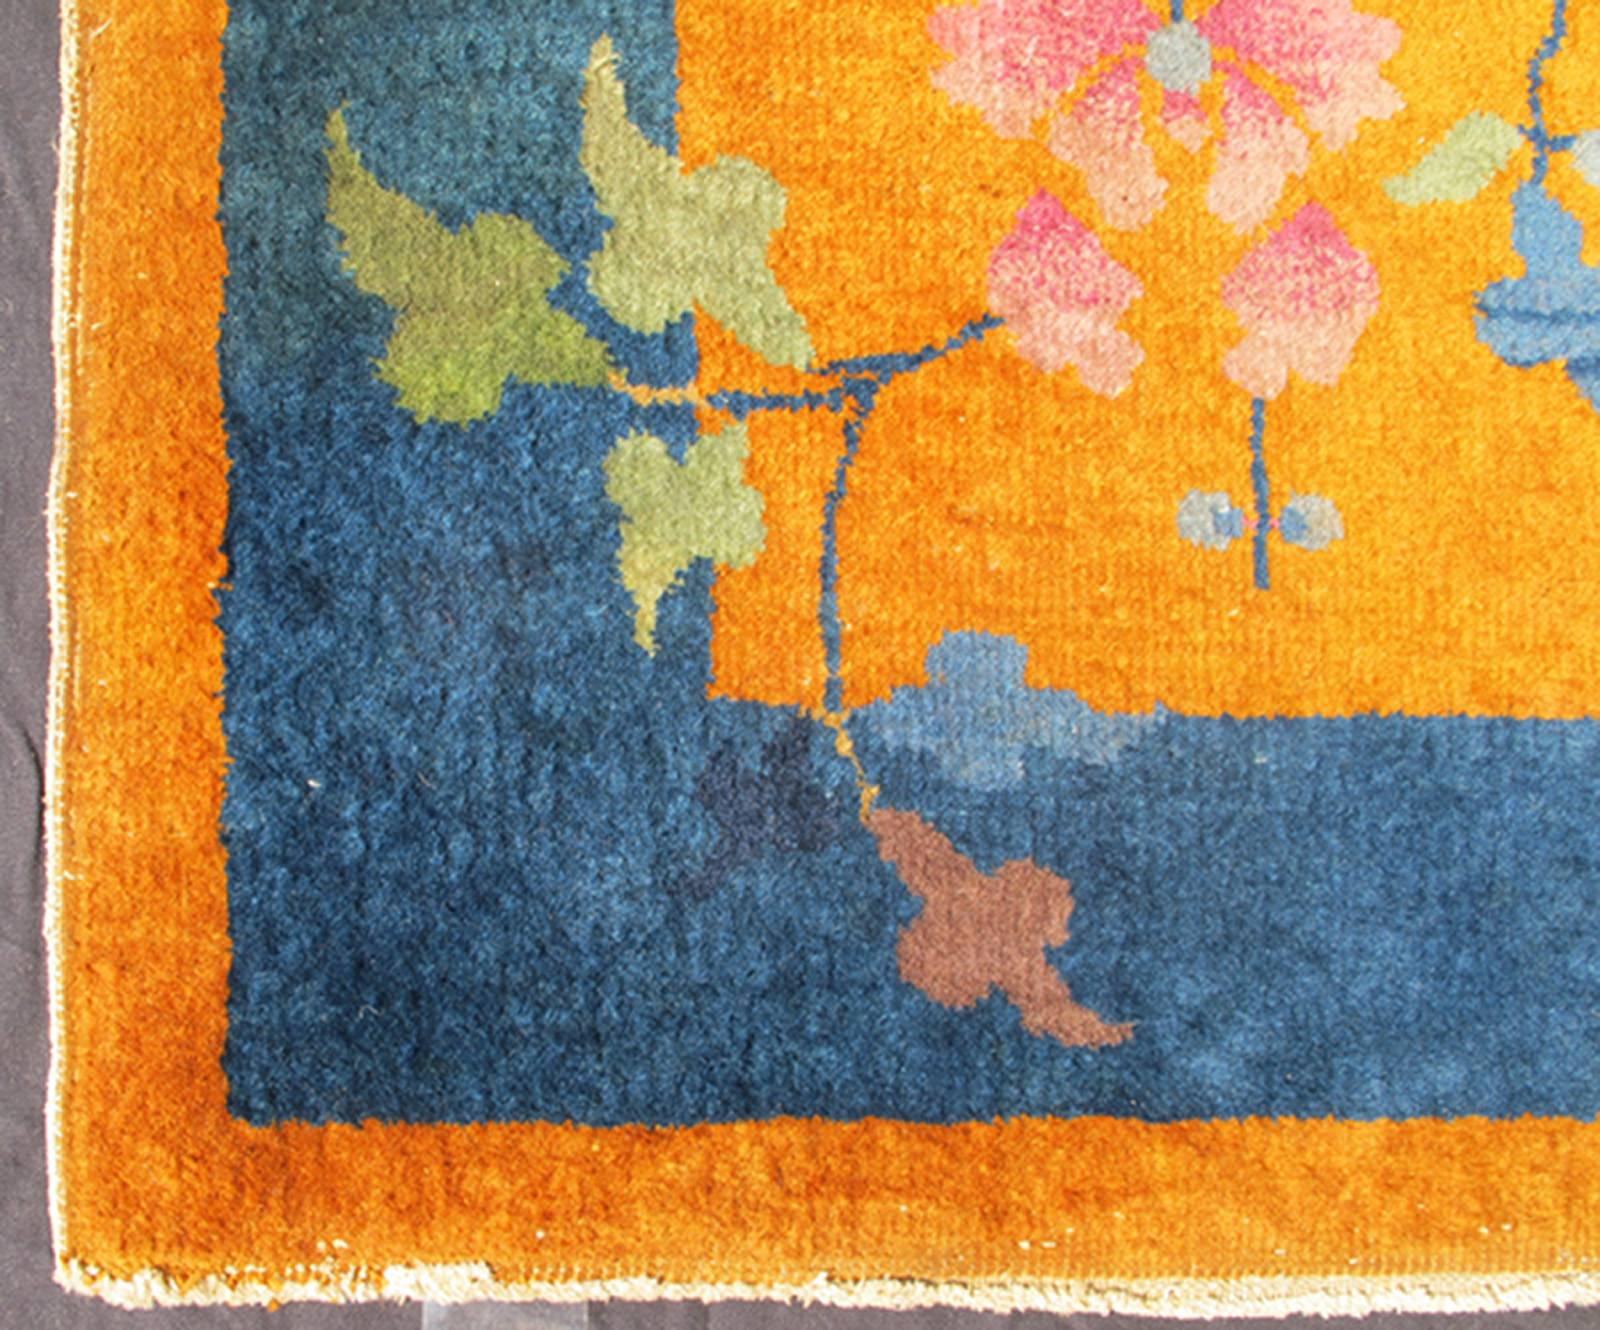 Orange background Art Deco Chinese rug with large tree and vining flowers, rug s12-0522, country of origin / type: China / Art Deco, circa 1930

Alive with color, this beautiful antique Art Deco Chinese rug, circa 1930 features a traditional